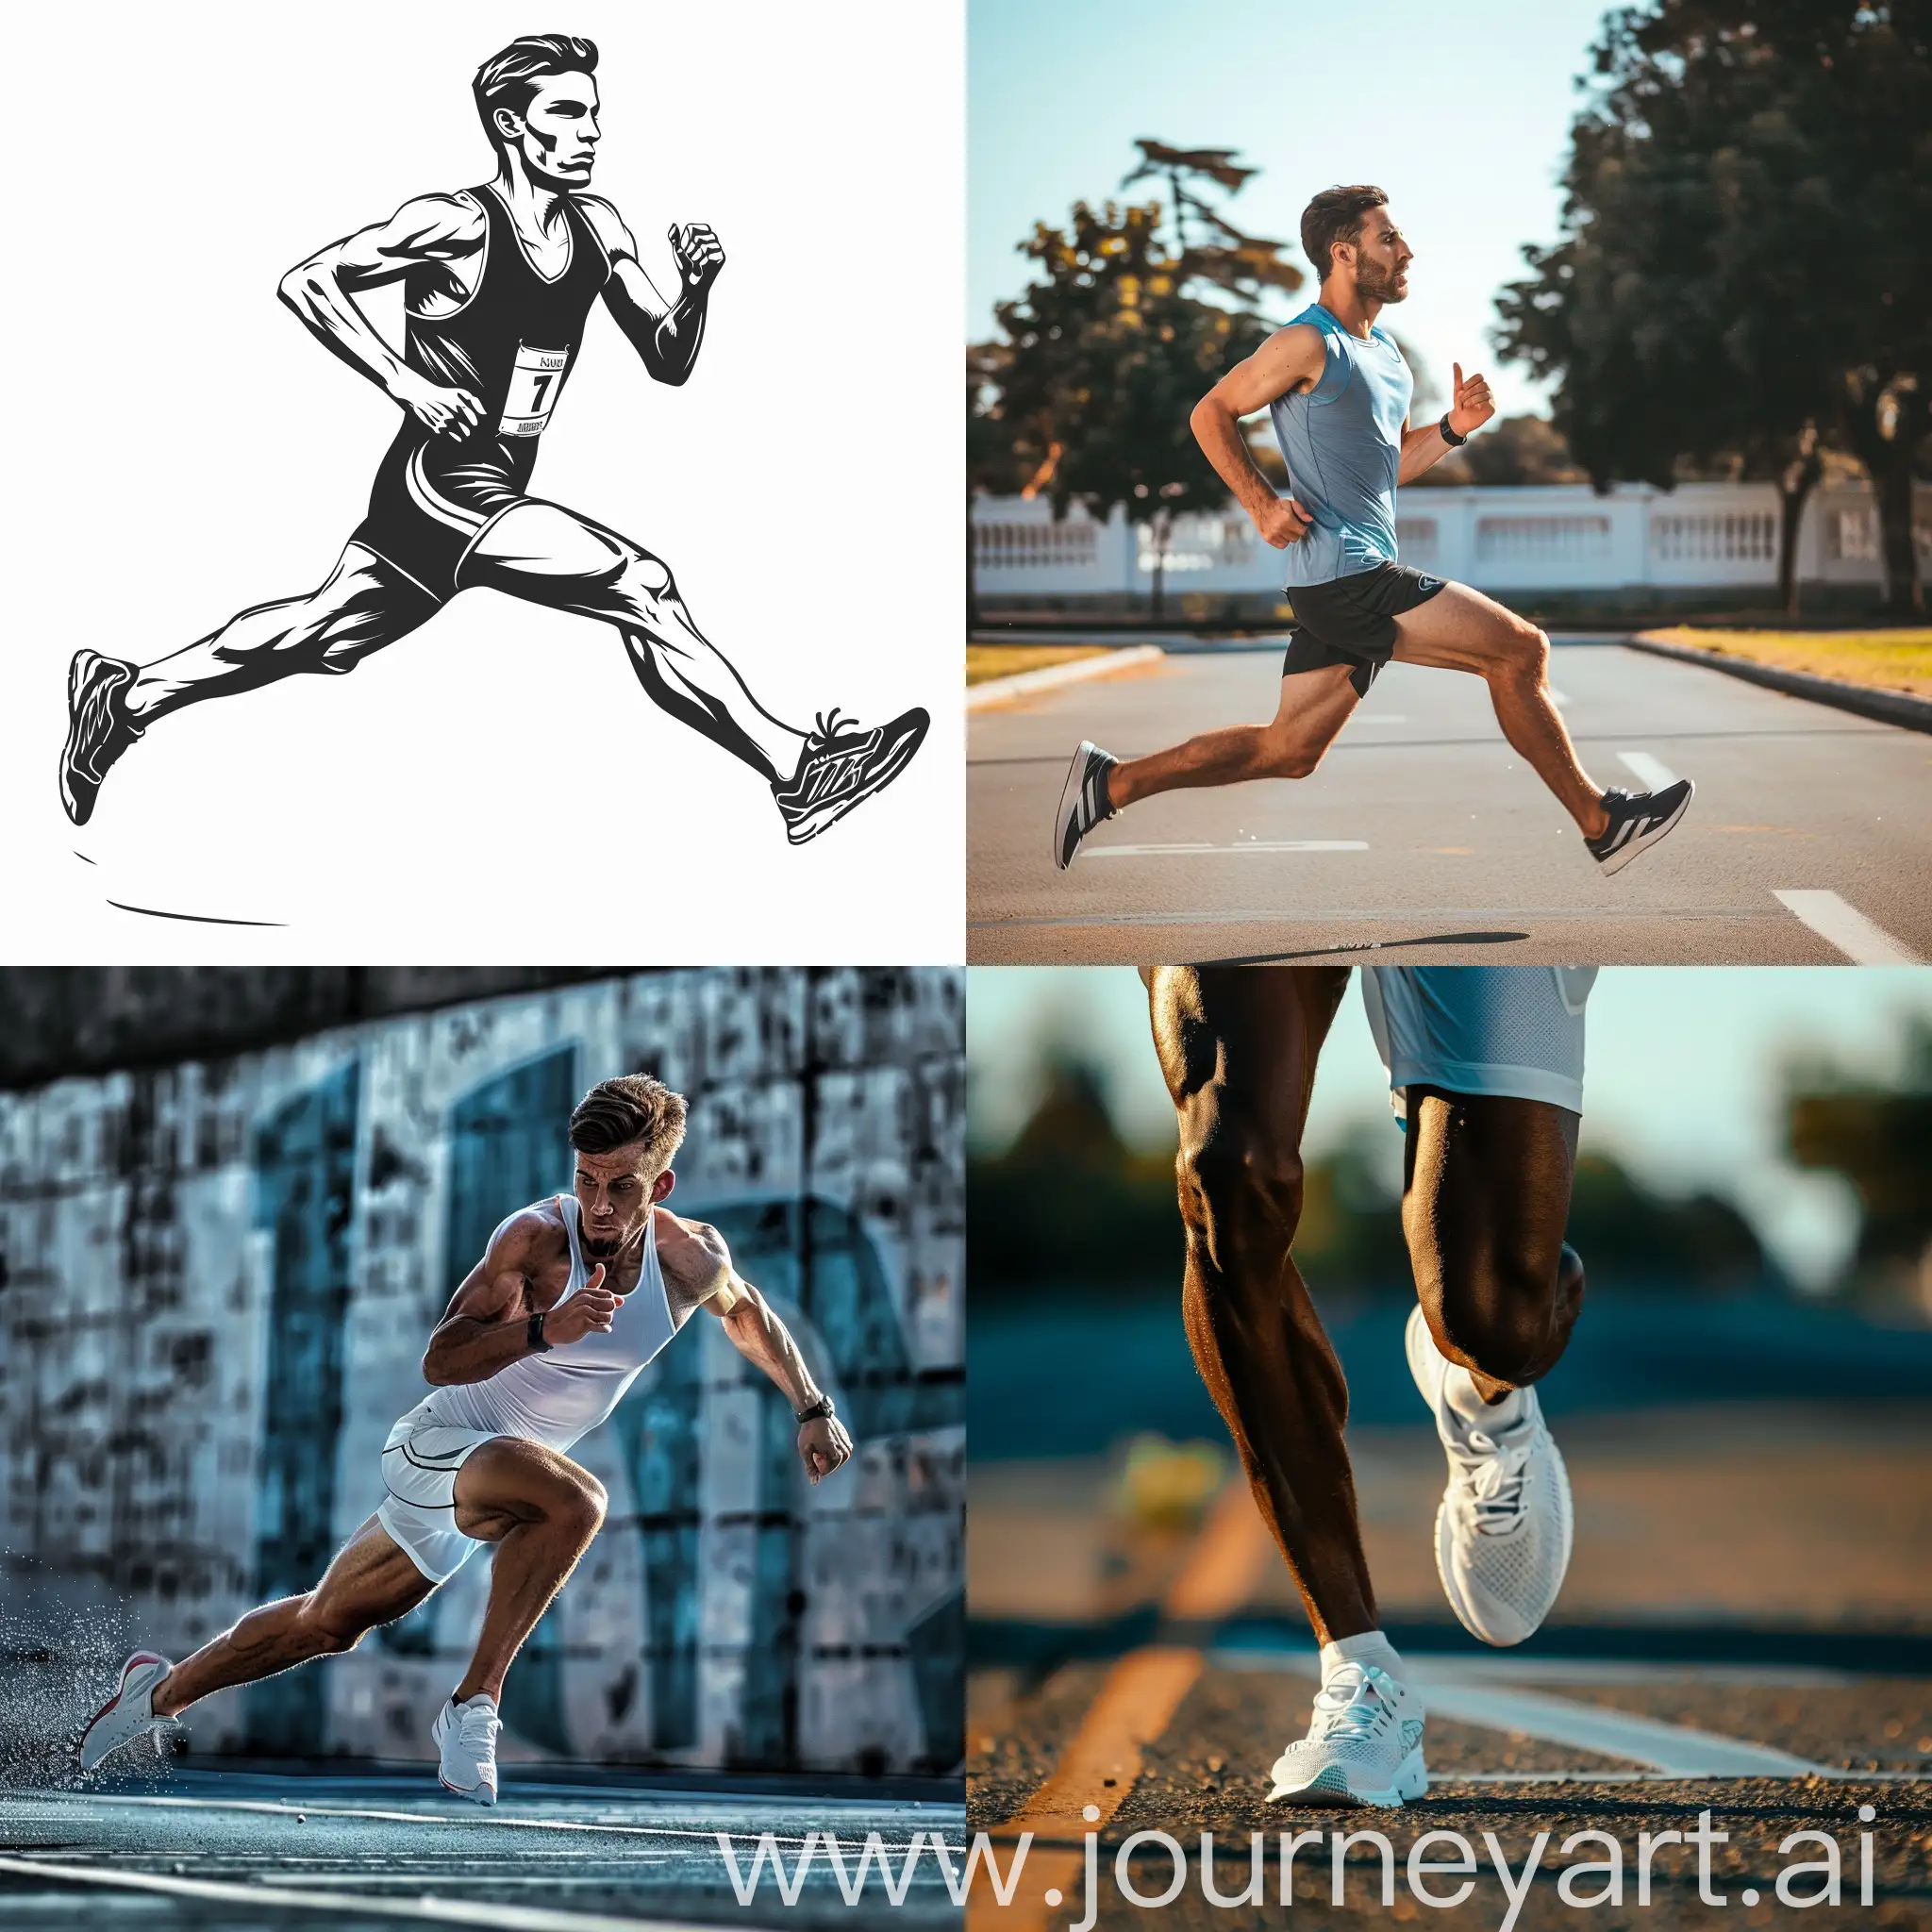 Dynamic-Running-Athlete-in-Vibrant-Sports-Action